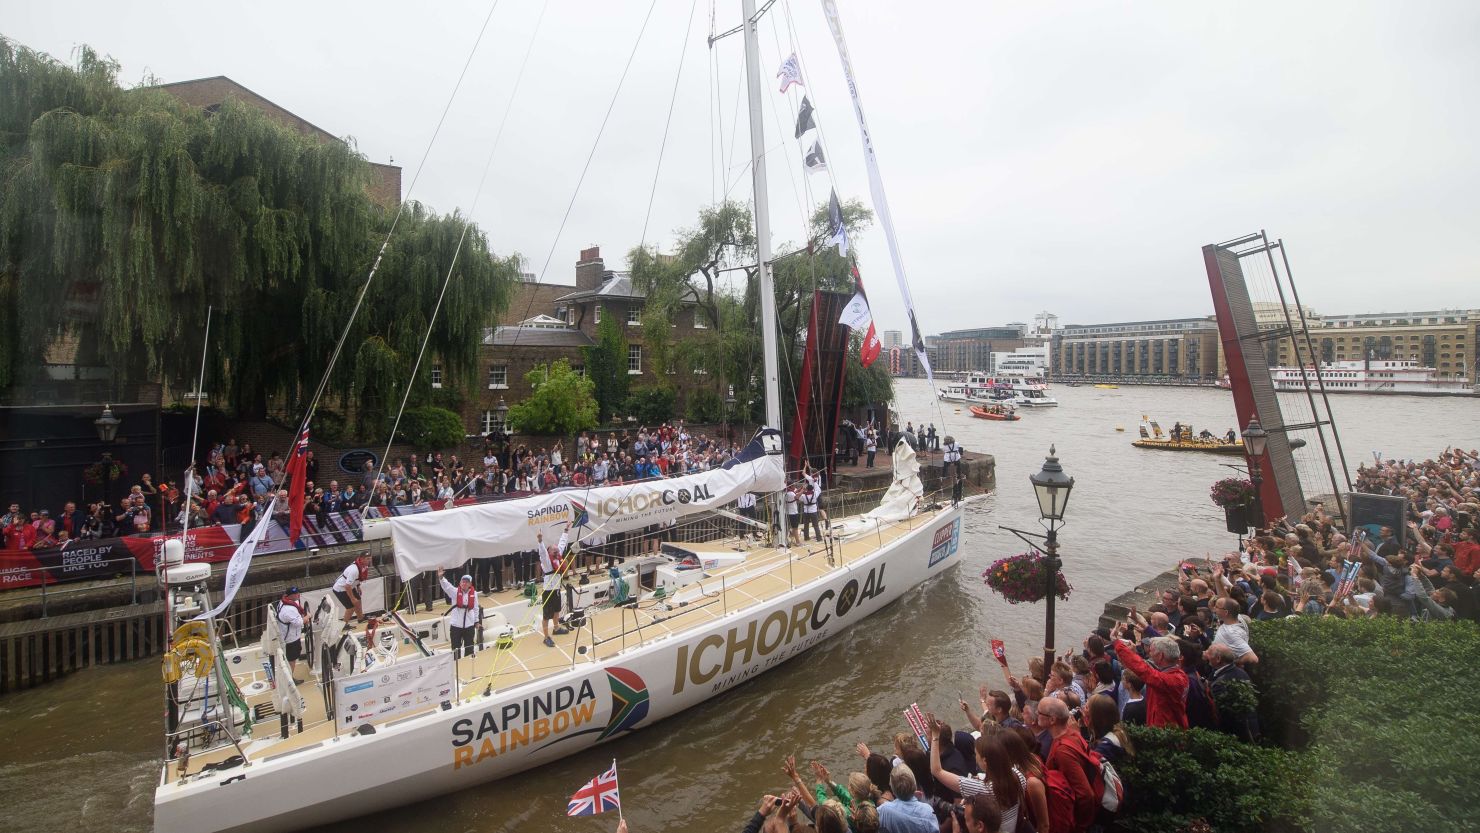 The IchorCoal clipper heads onto the river Thames in central London on August 30, 2015, as it moves into place to begin the 2015-16 Clipper Round the World Yacht Race.